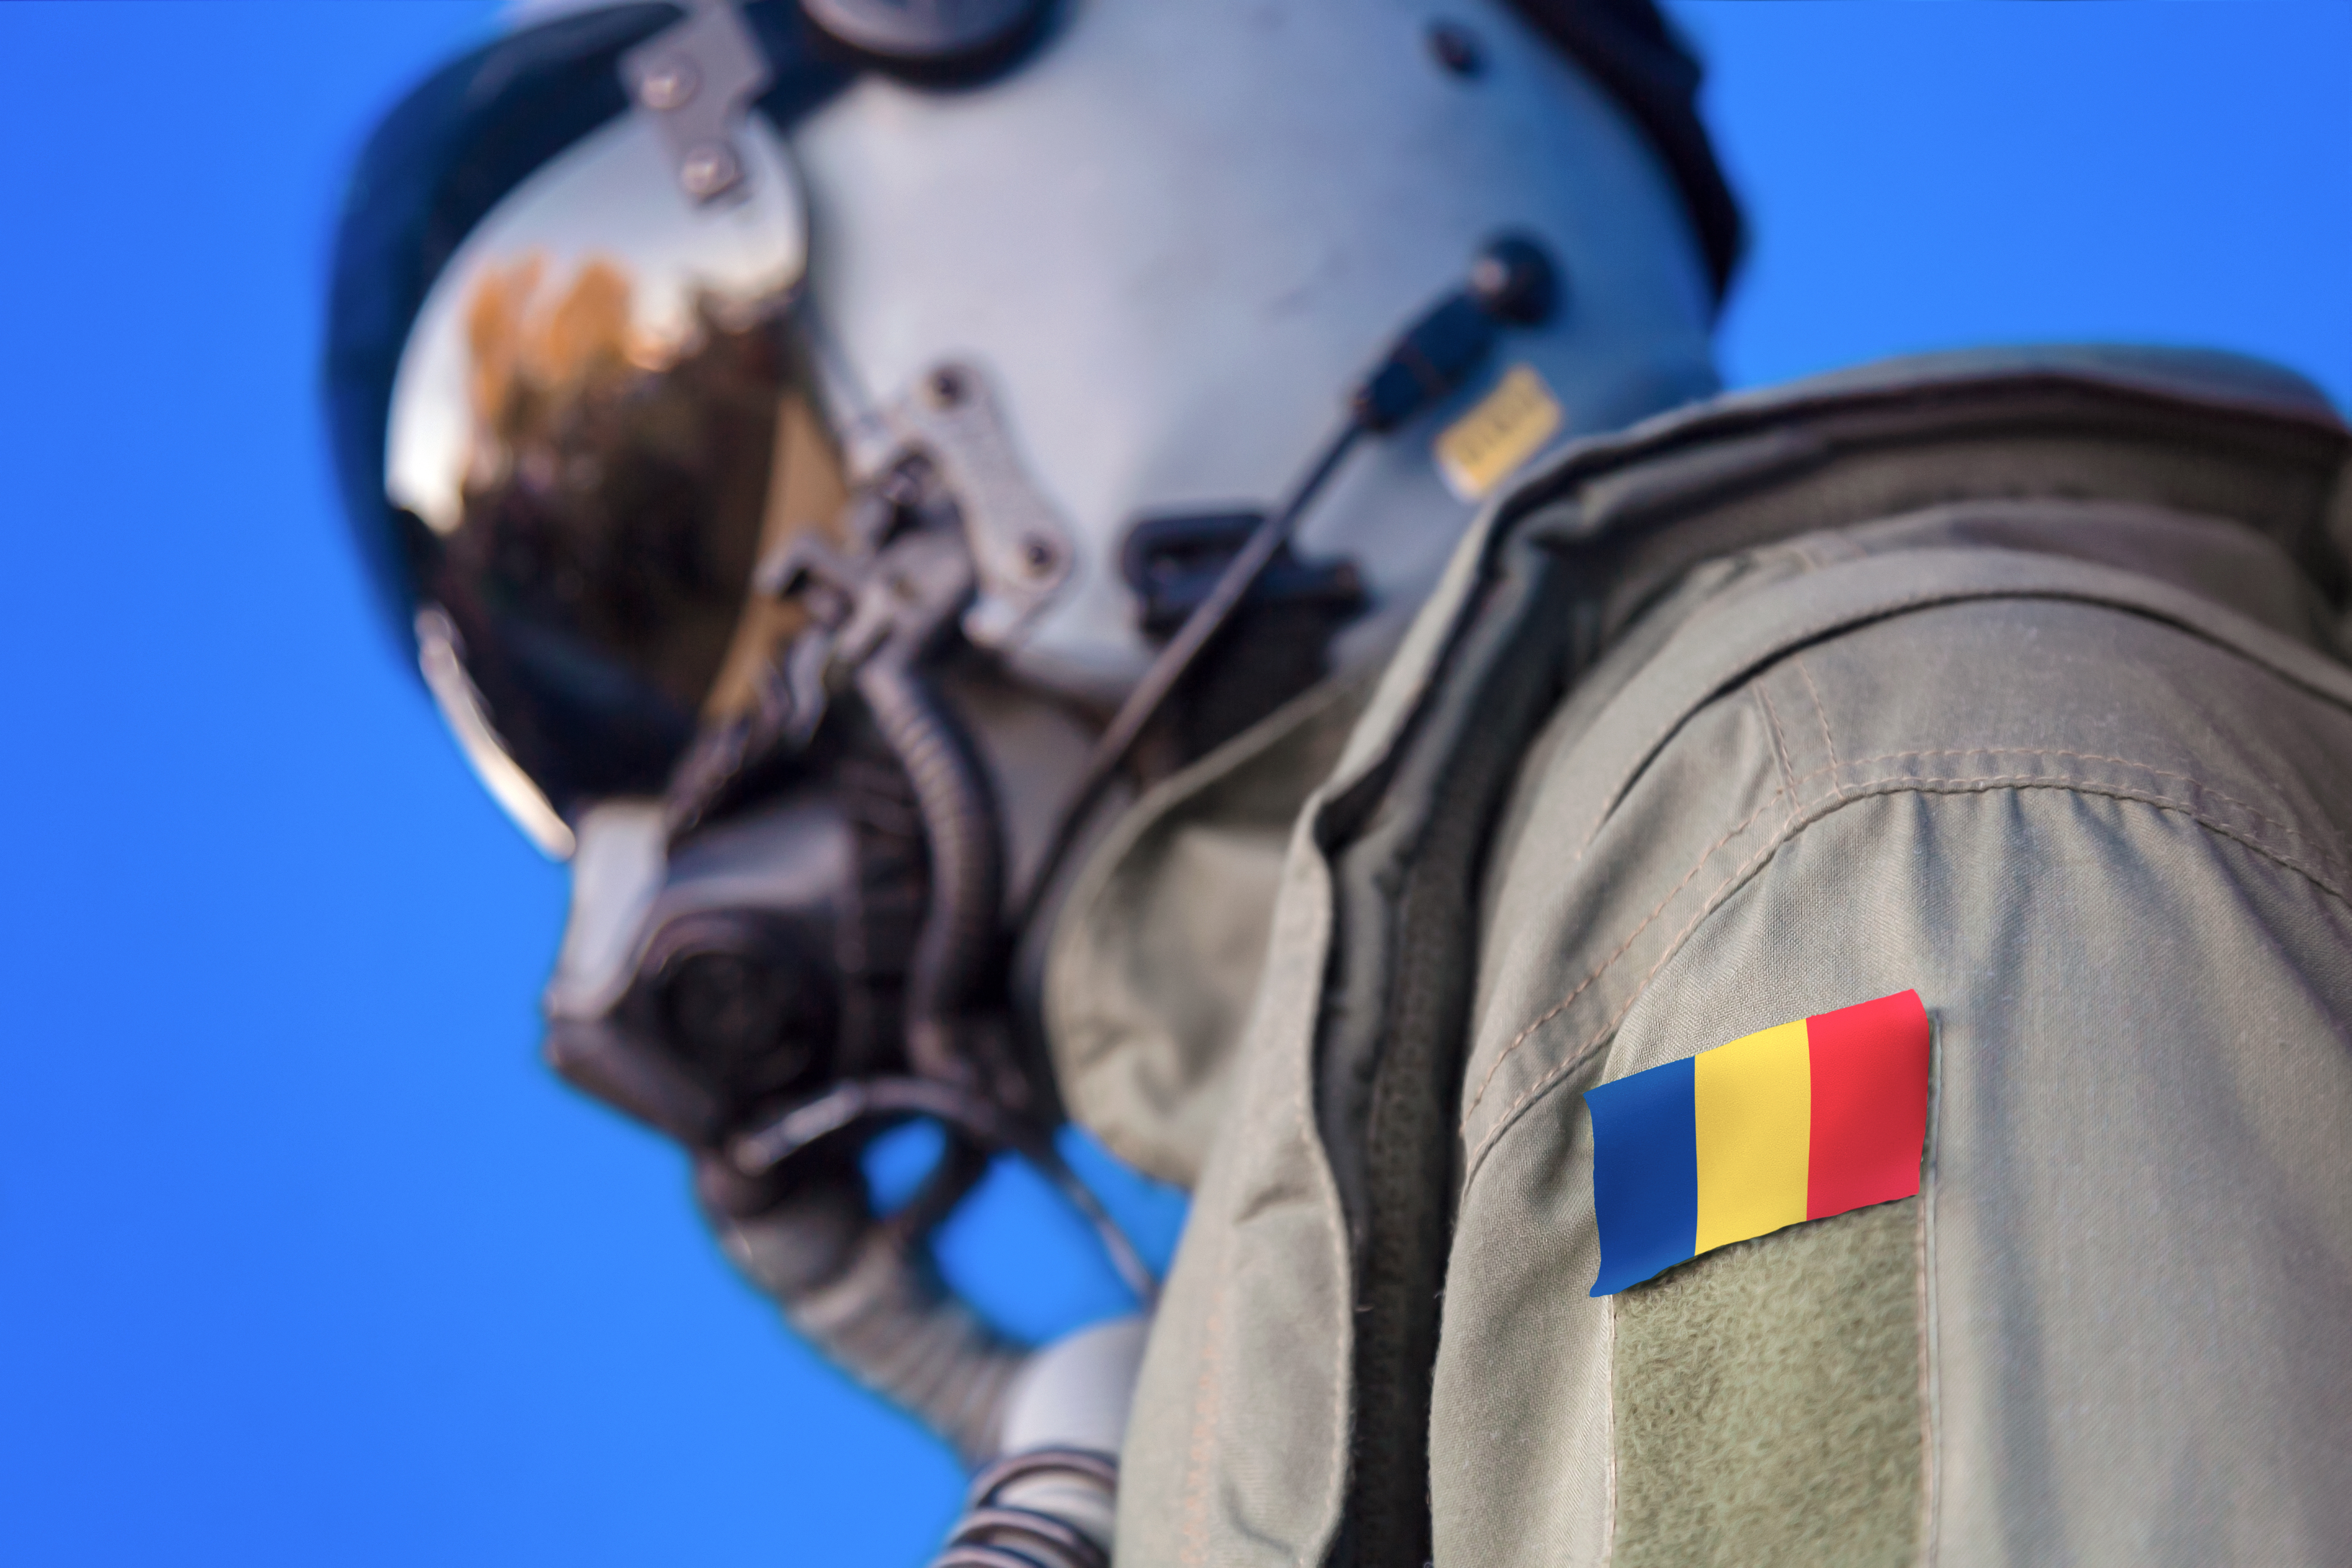 Airforce pilot with Romanian flag